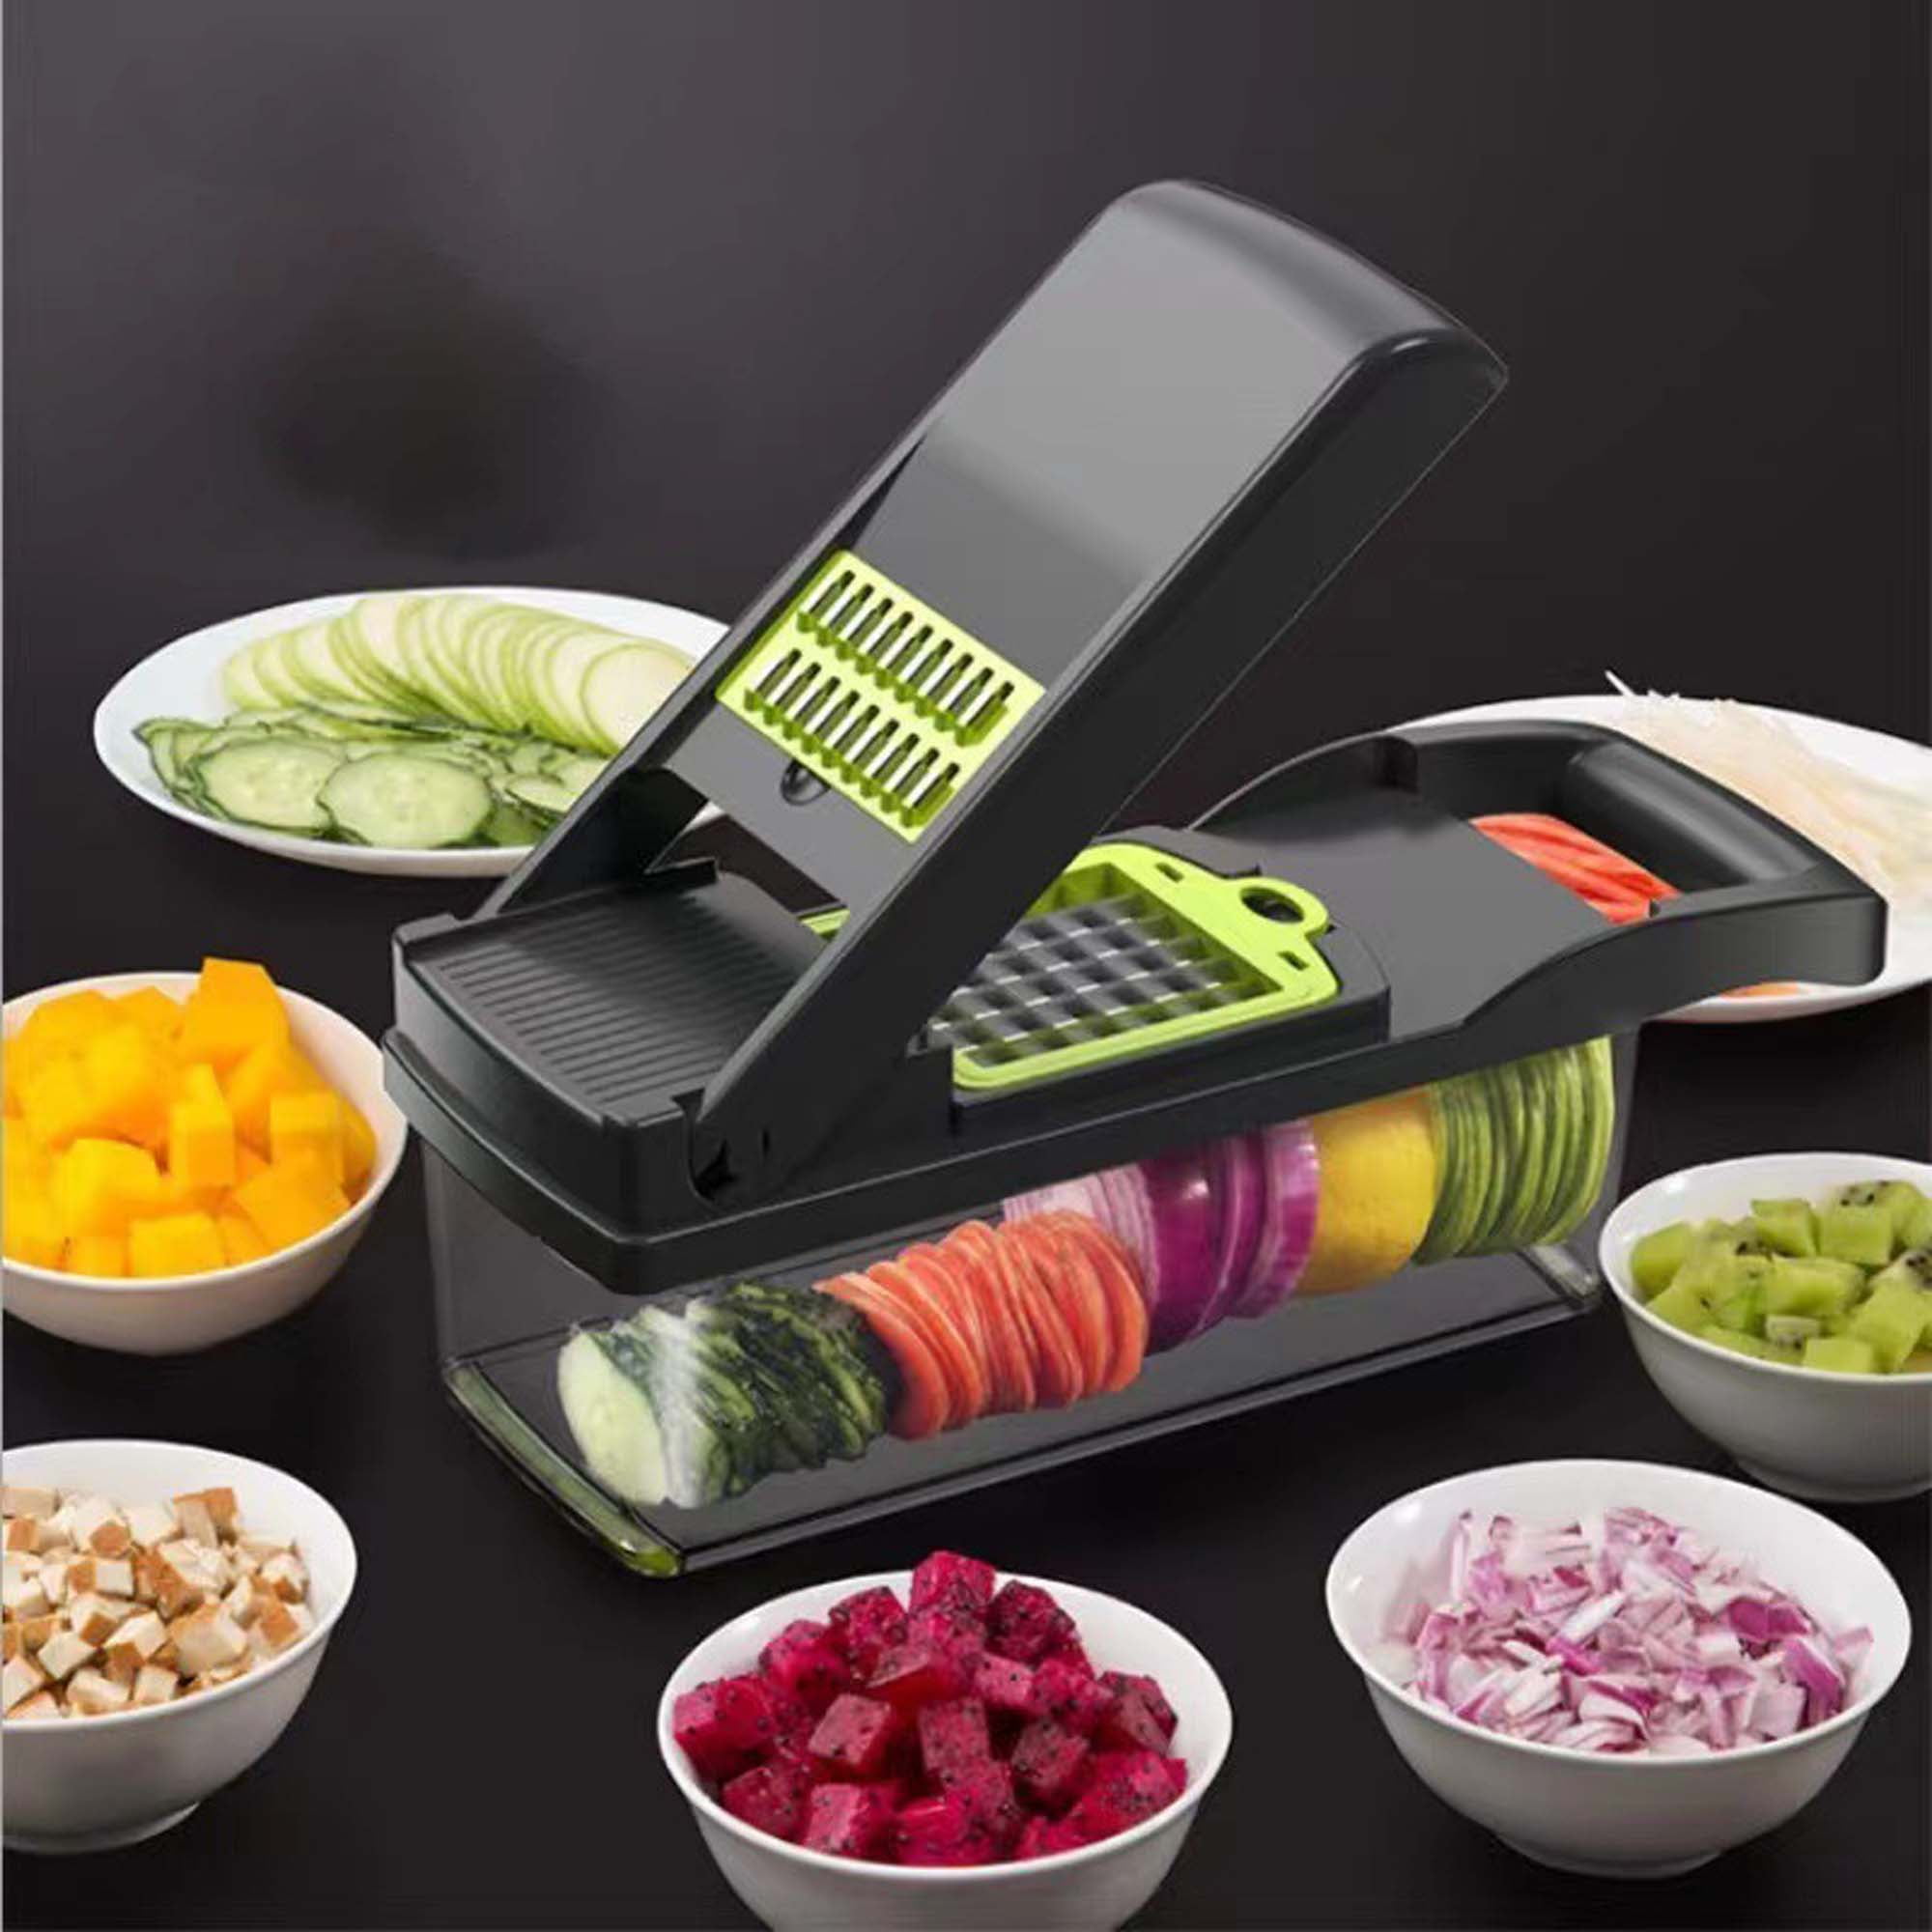  MAIPOR Vegetable Chopper Pro, Multifunctional 13 in 1